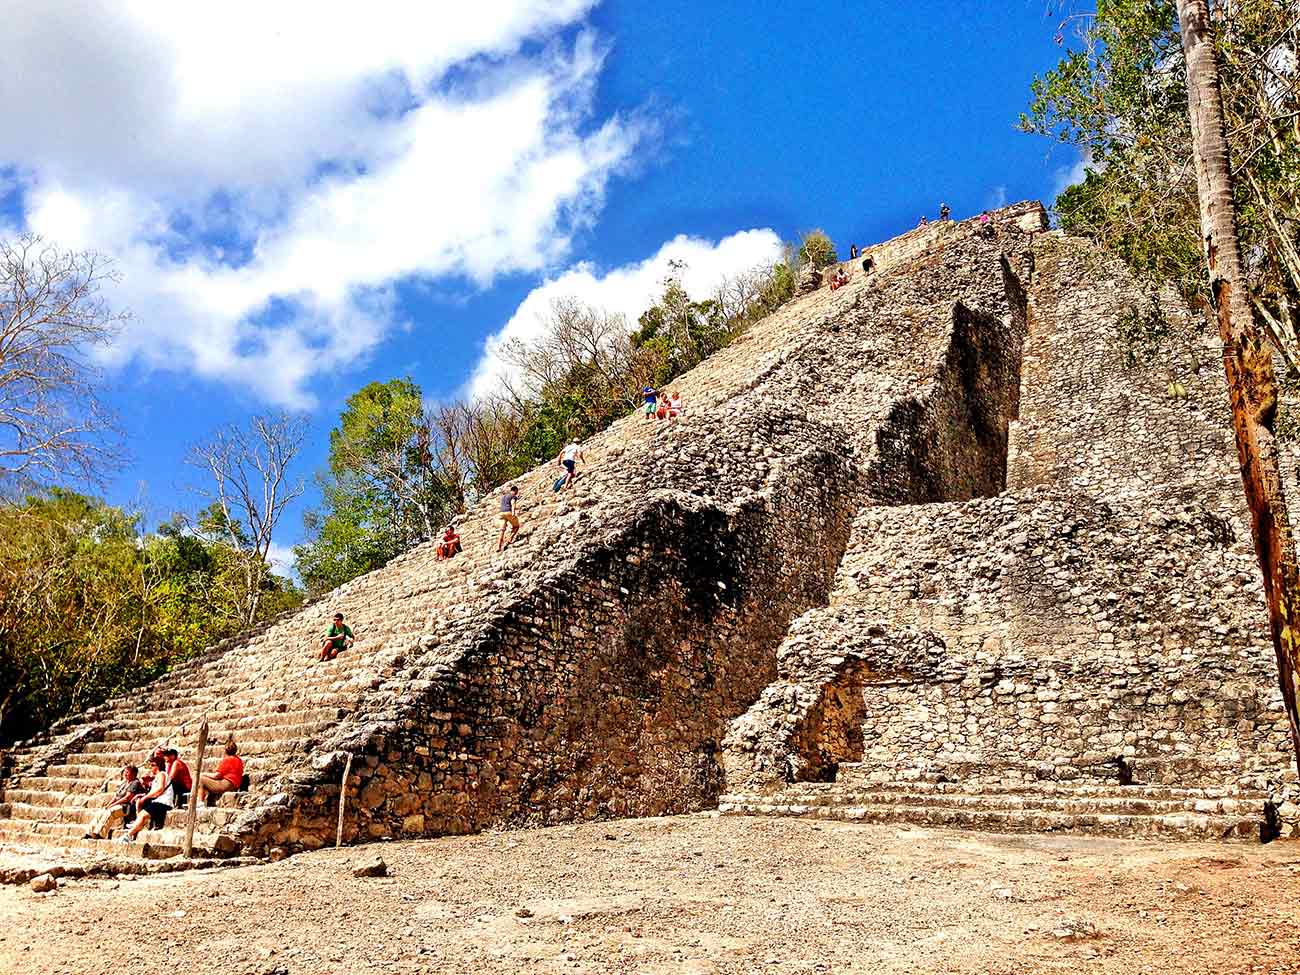 Tour G. Coba and Cenote Tamcach ha & Mayan Village | Group Discount Rate $155.US dollars per person